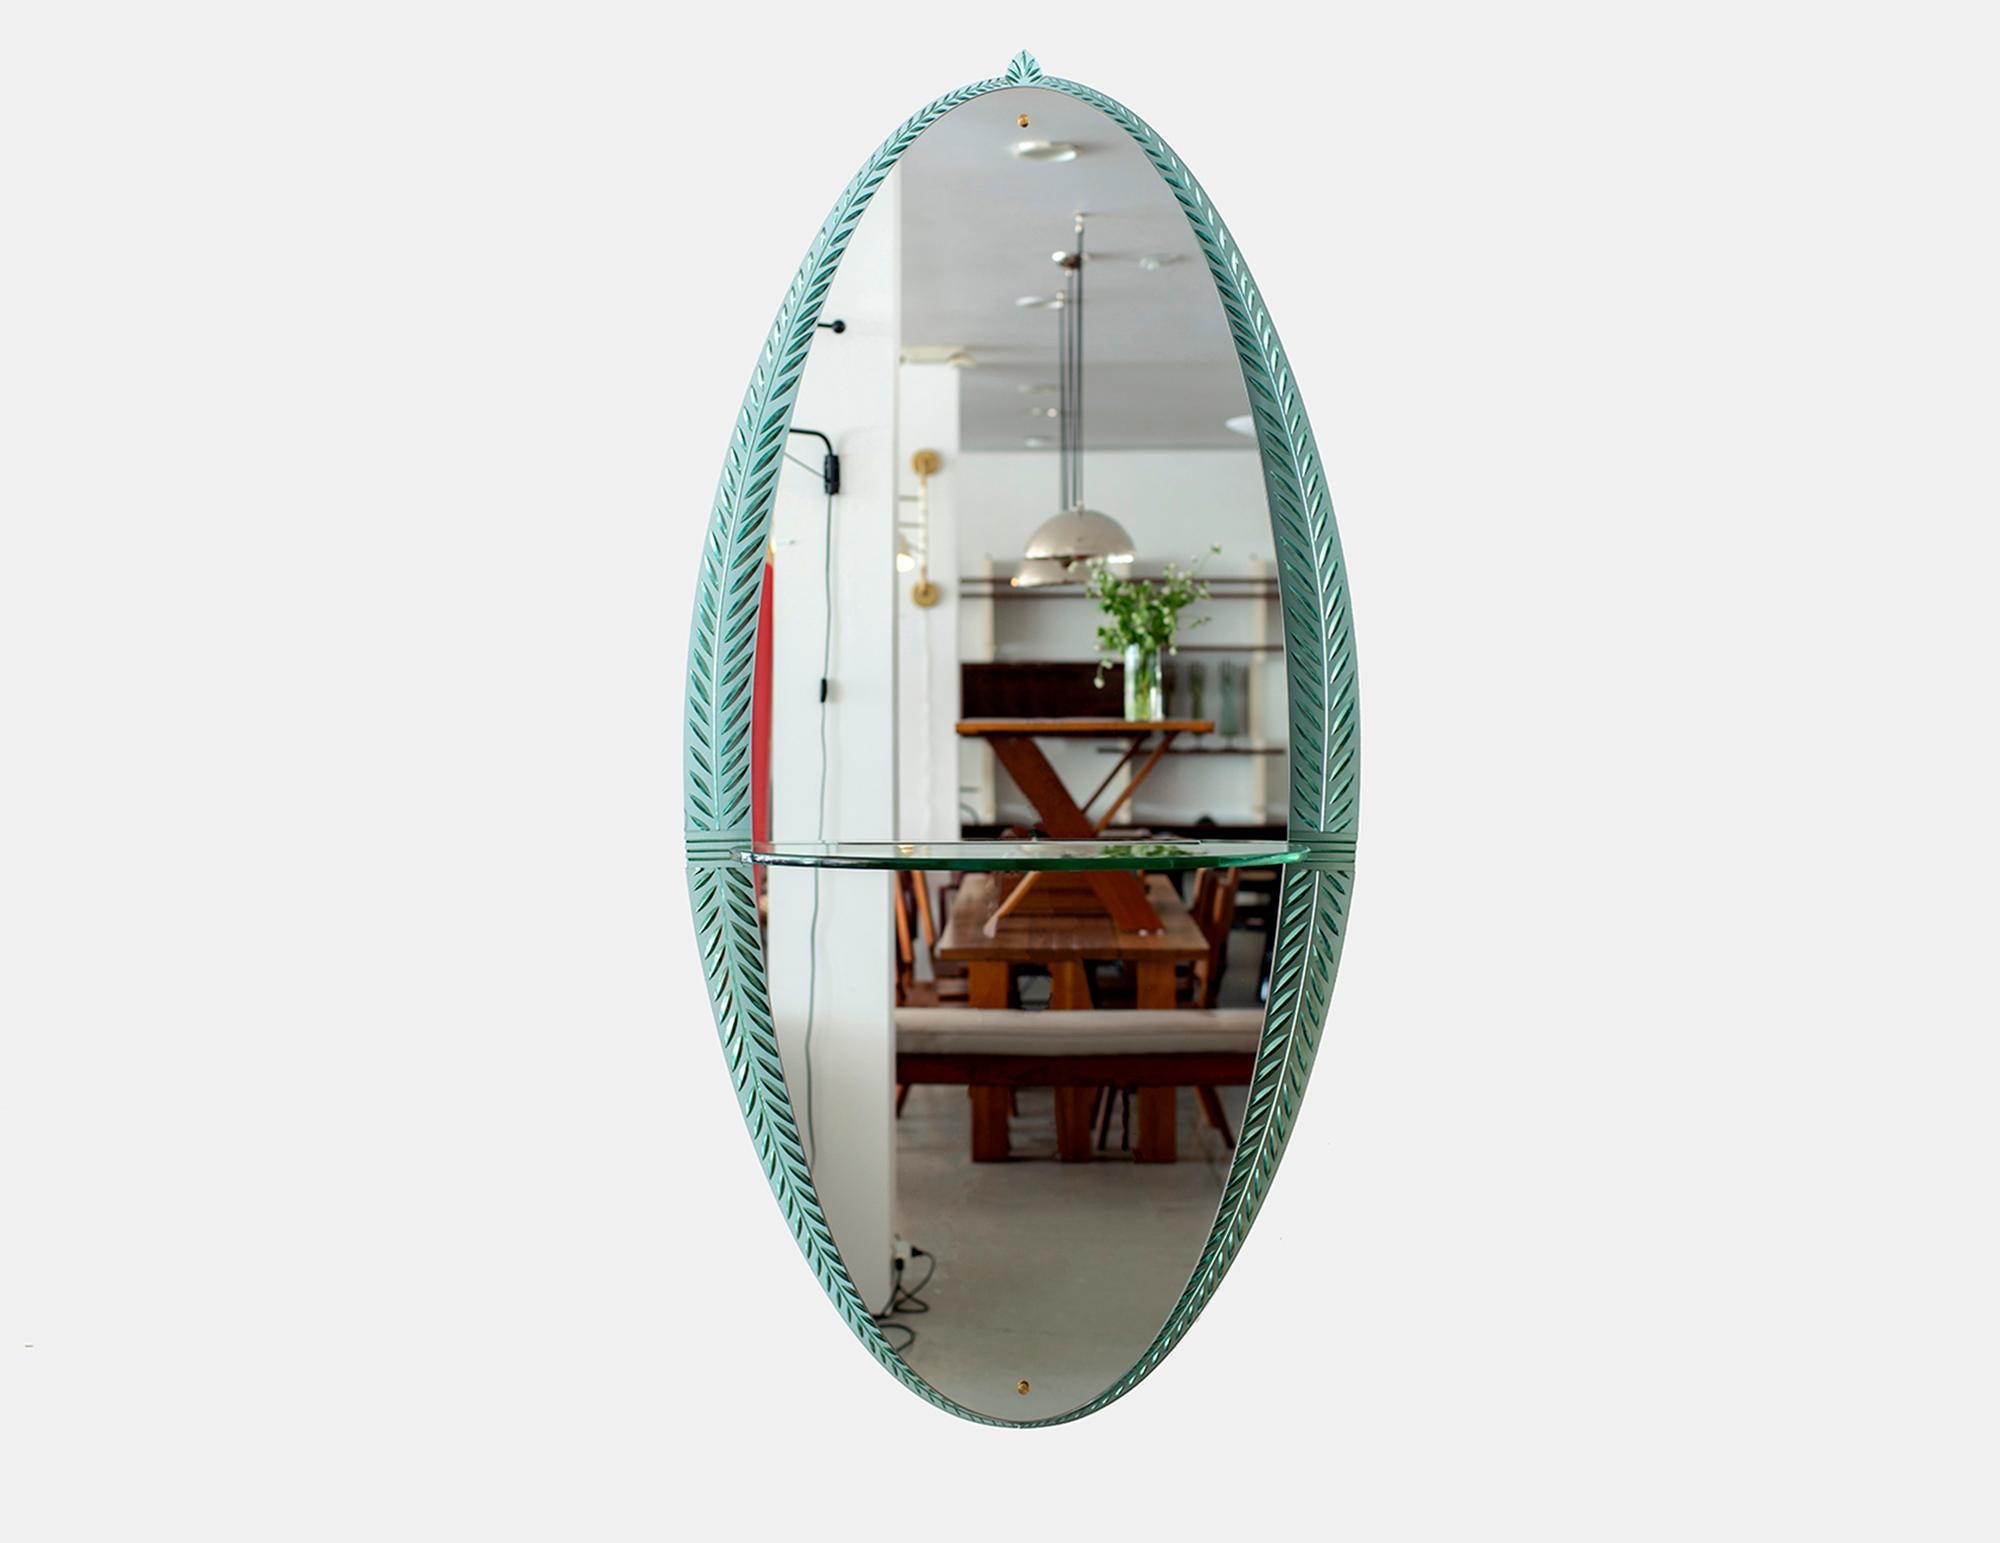 Gorgeous Cristal Art wall mirror, Italy, circa 1955.
Ornate crystal cut glass detailing in oval shape with glass shelf and brass details
Exquisite piece.